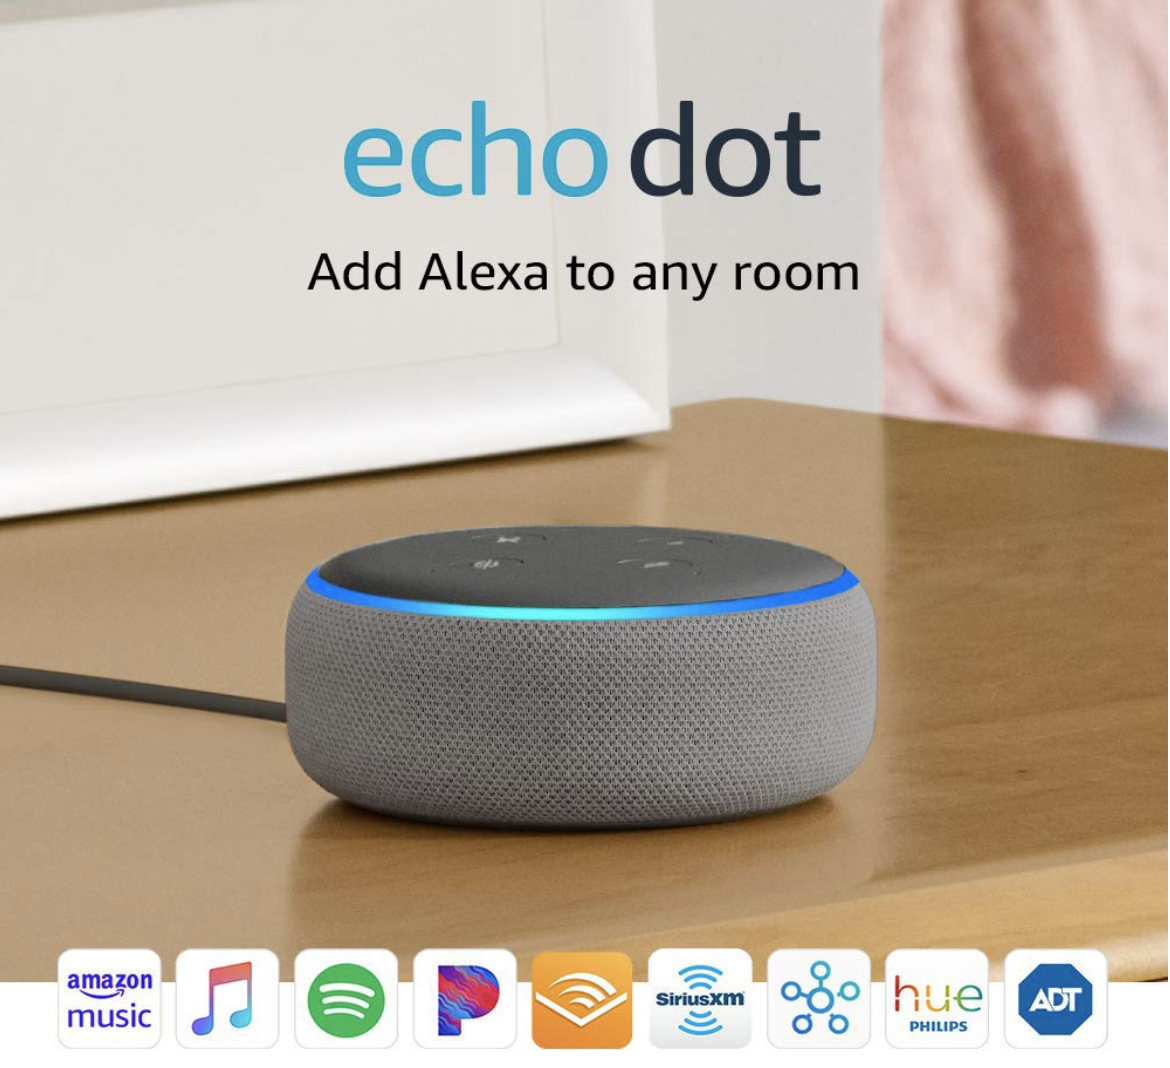 Free Echo Dot With Purchase of Any Fire TV Edition